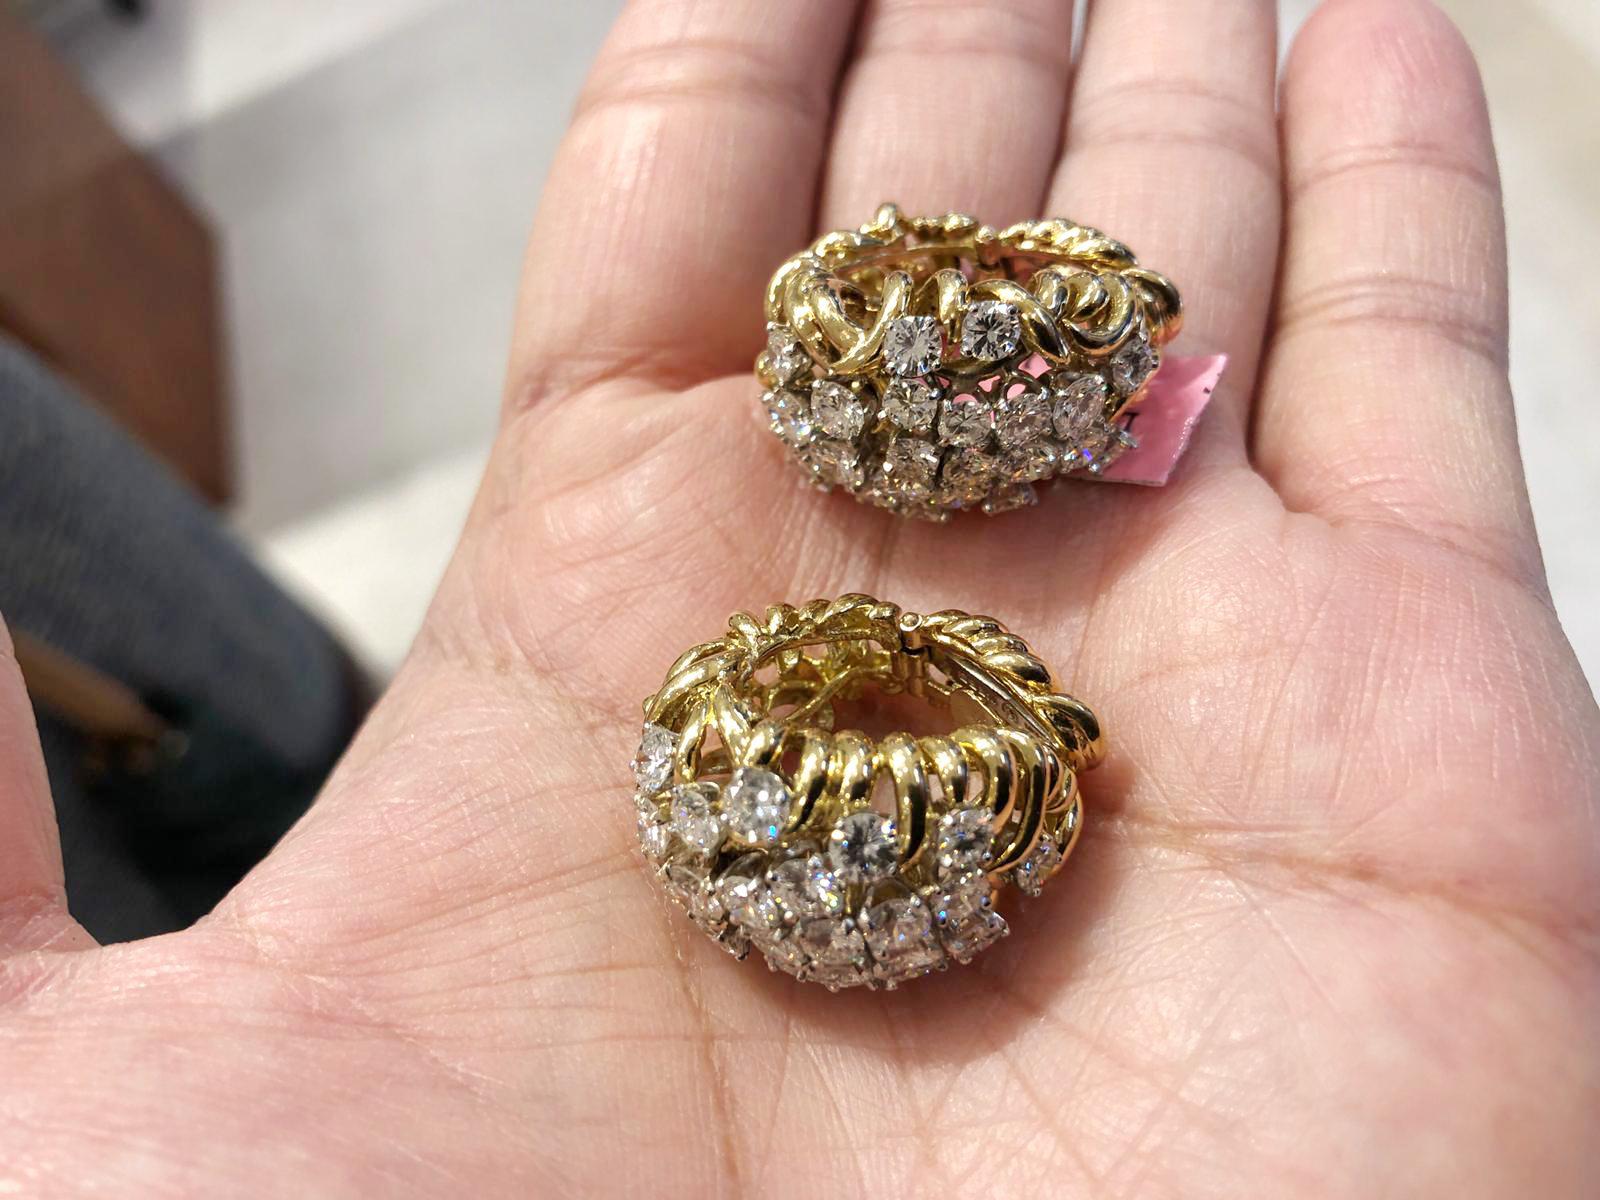 A sublime pair of David Webb earrings of bombe design, set with luminous round cut diamonds weighing approximately 8.20 carats, finely mounted in 18k yellow gold and platinum.
Signed David Webb. Circa 1980s.

Condition: Good - Previously owned and